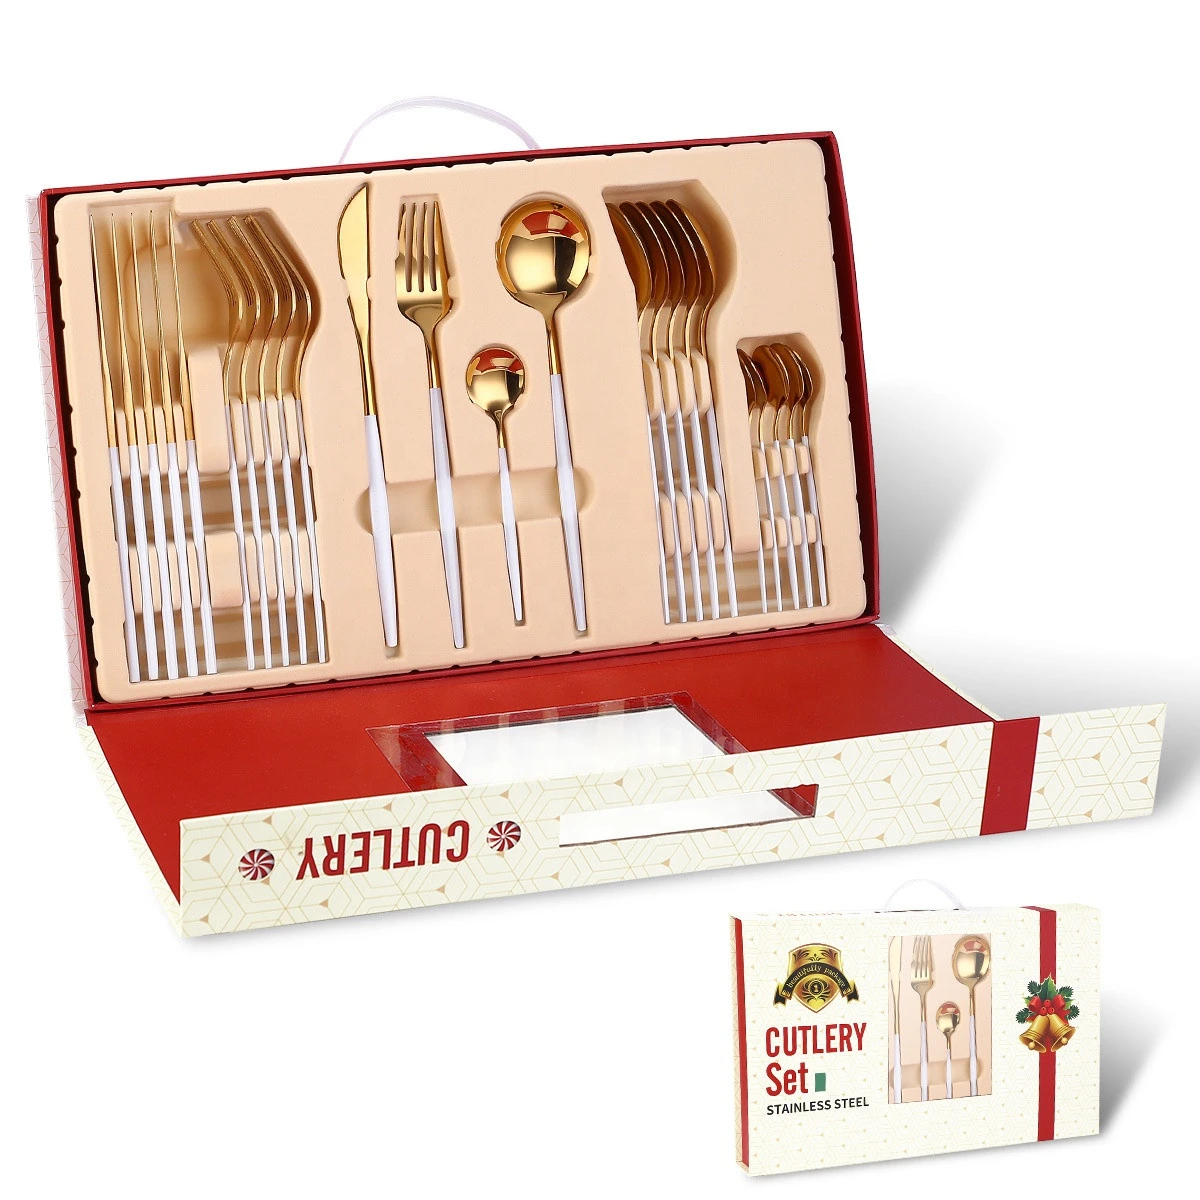 Christmas promotion wedding gift cutipol goa cutlery set 24pc mirror shiny pink and gold silverware set